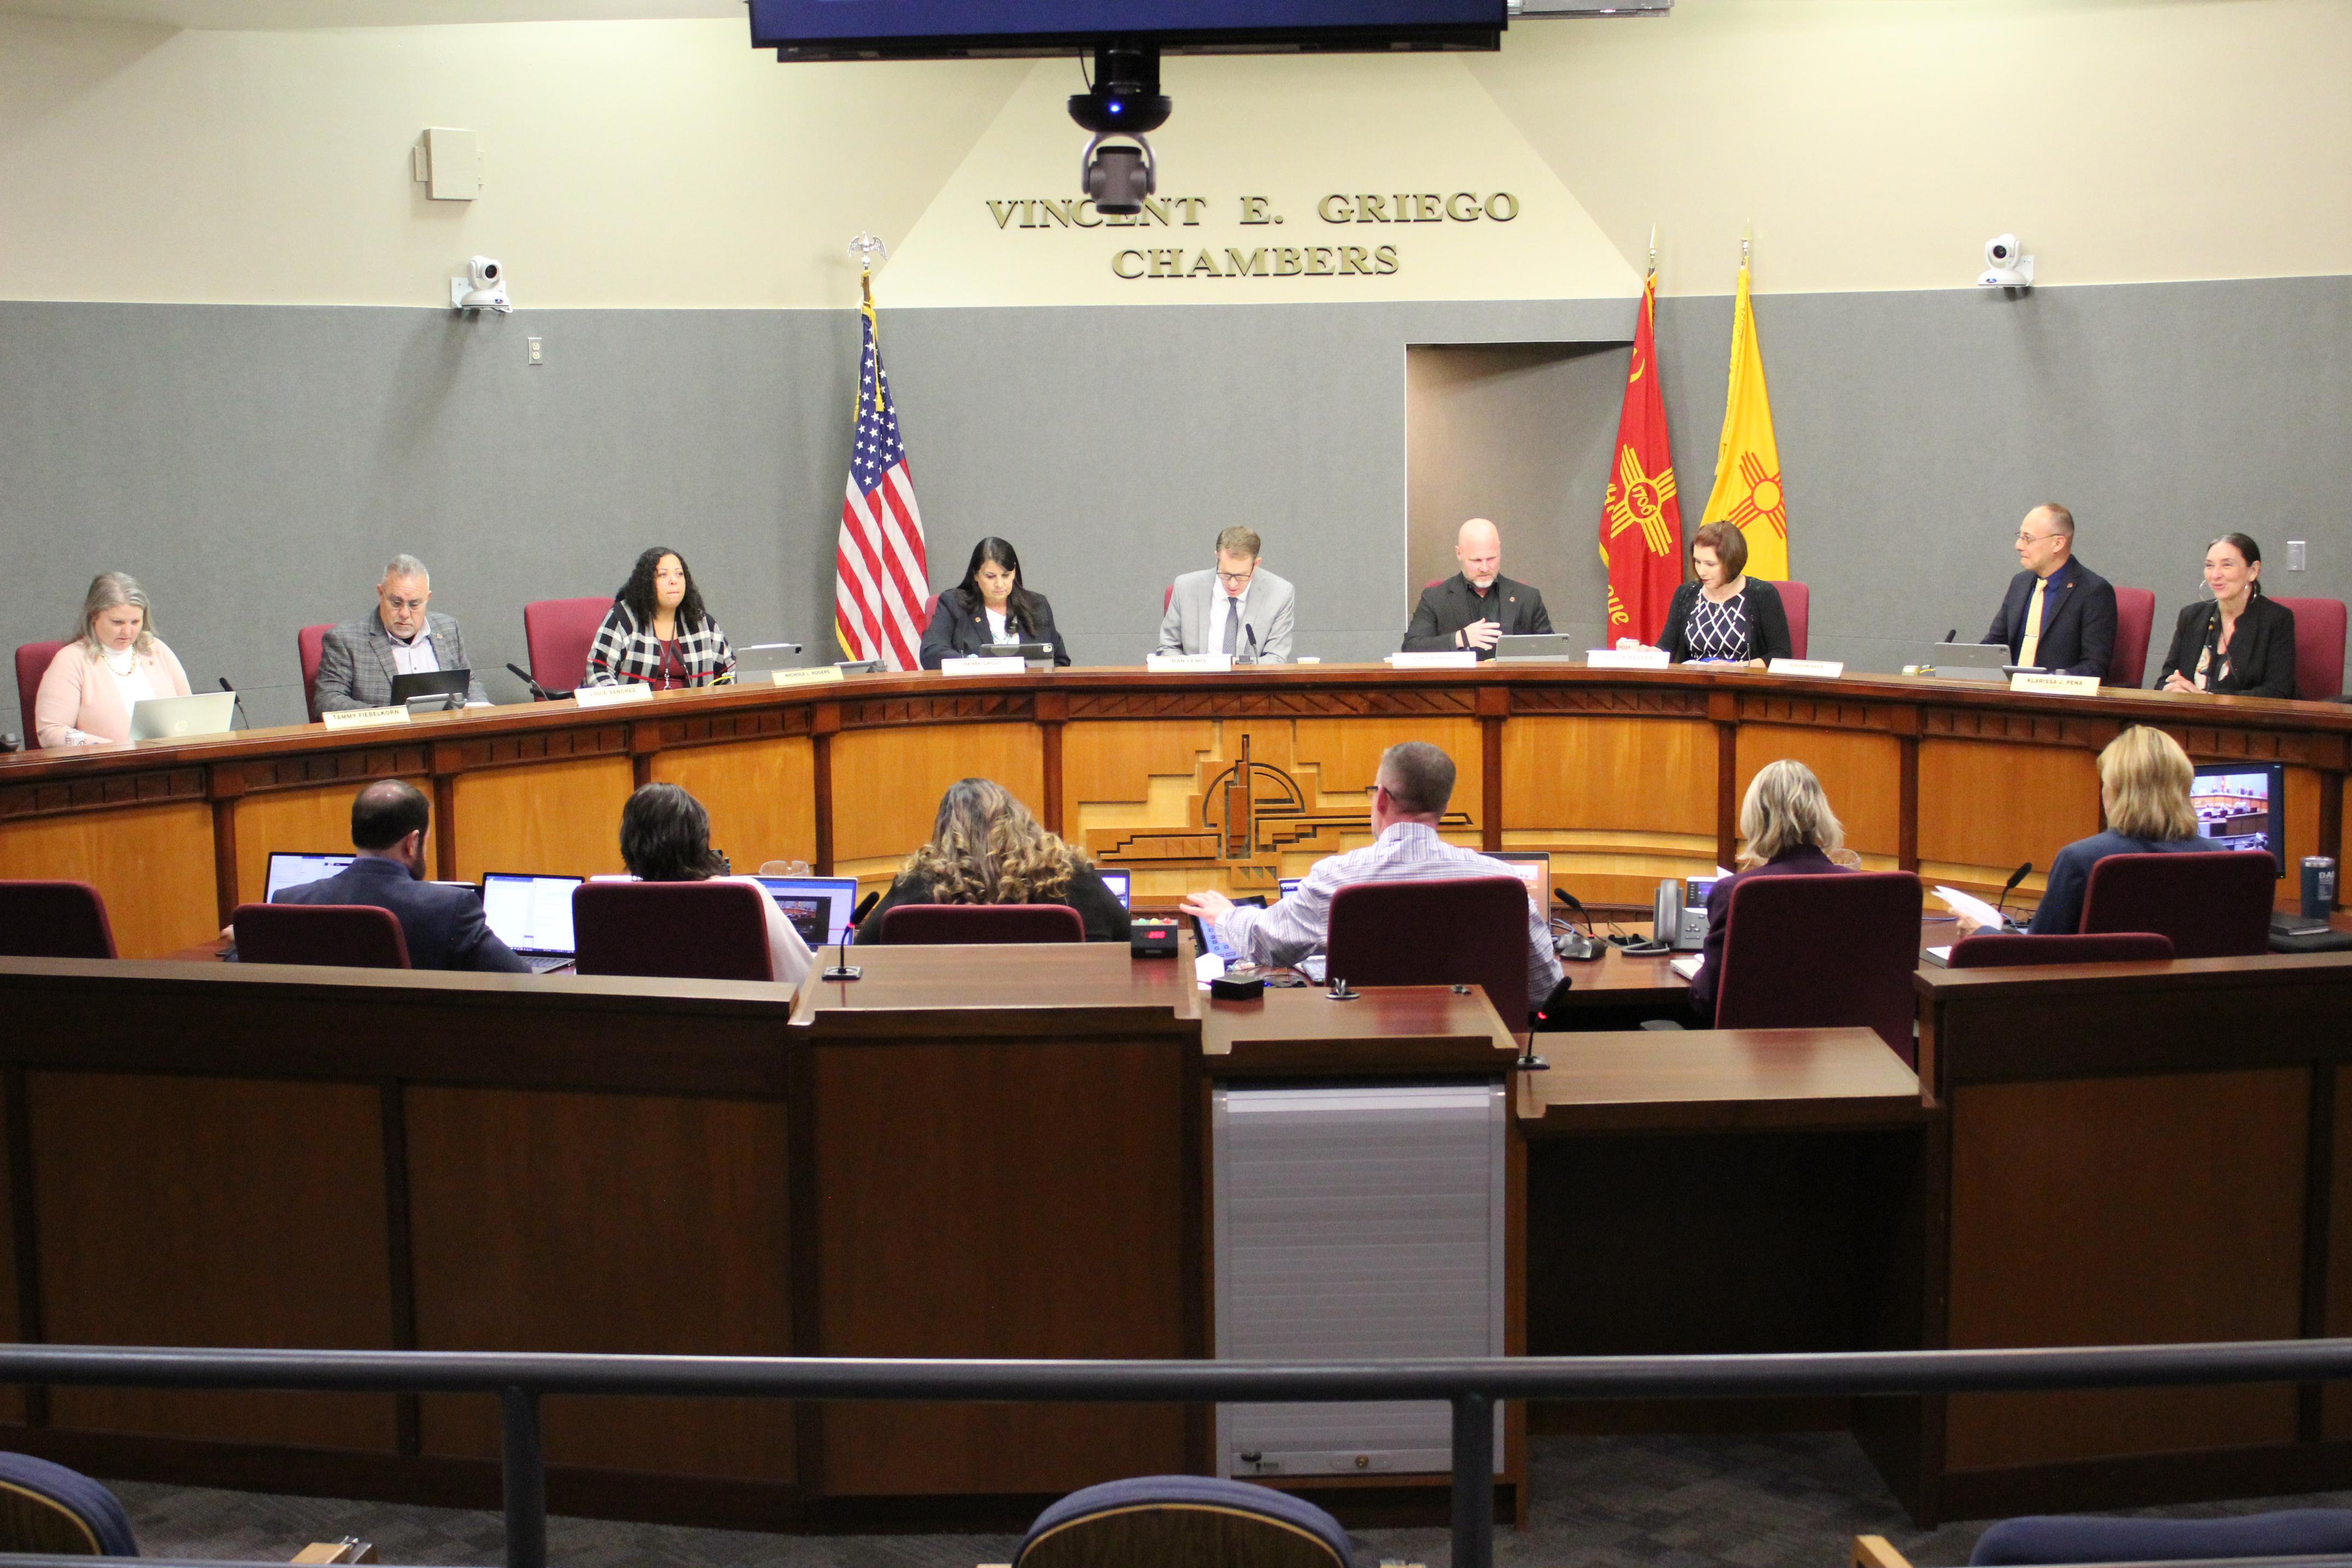 A photo of the City Council in session.